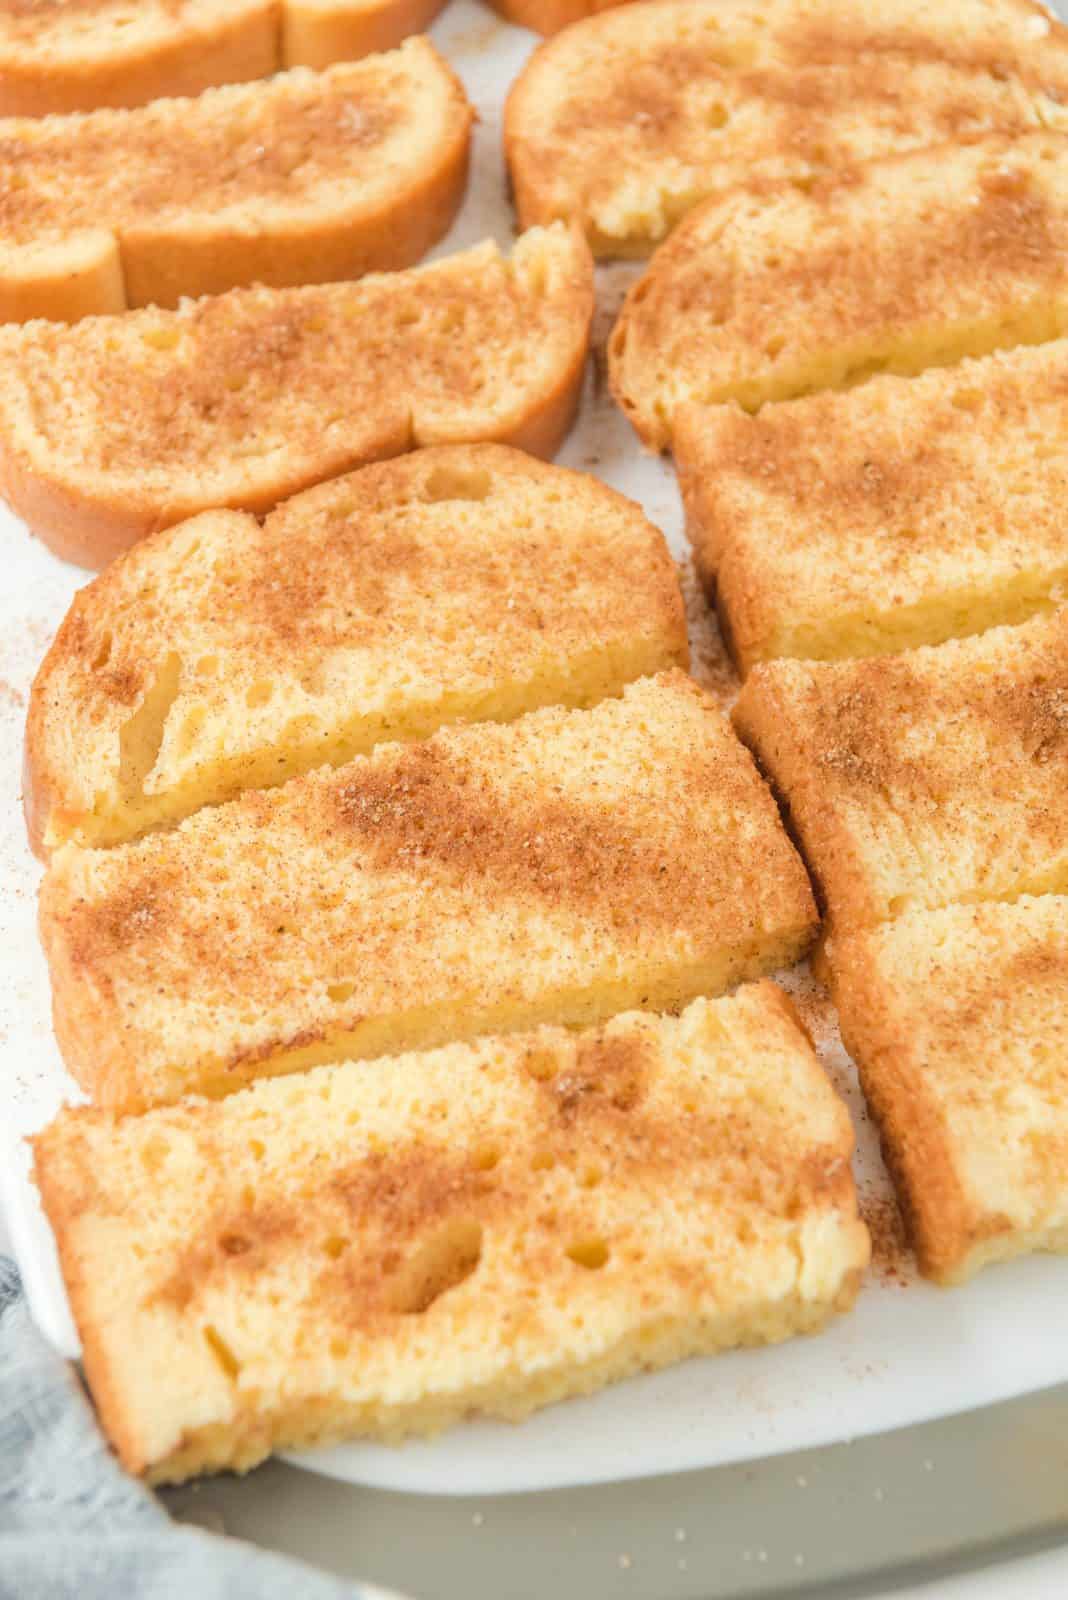 Dipped bread sticks sprinkled with cinnamon sugar mixture.